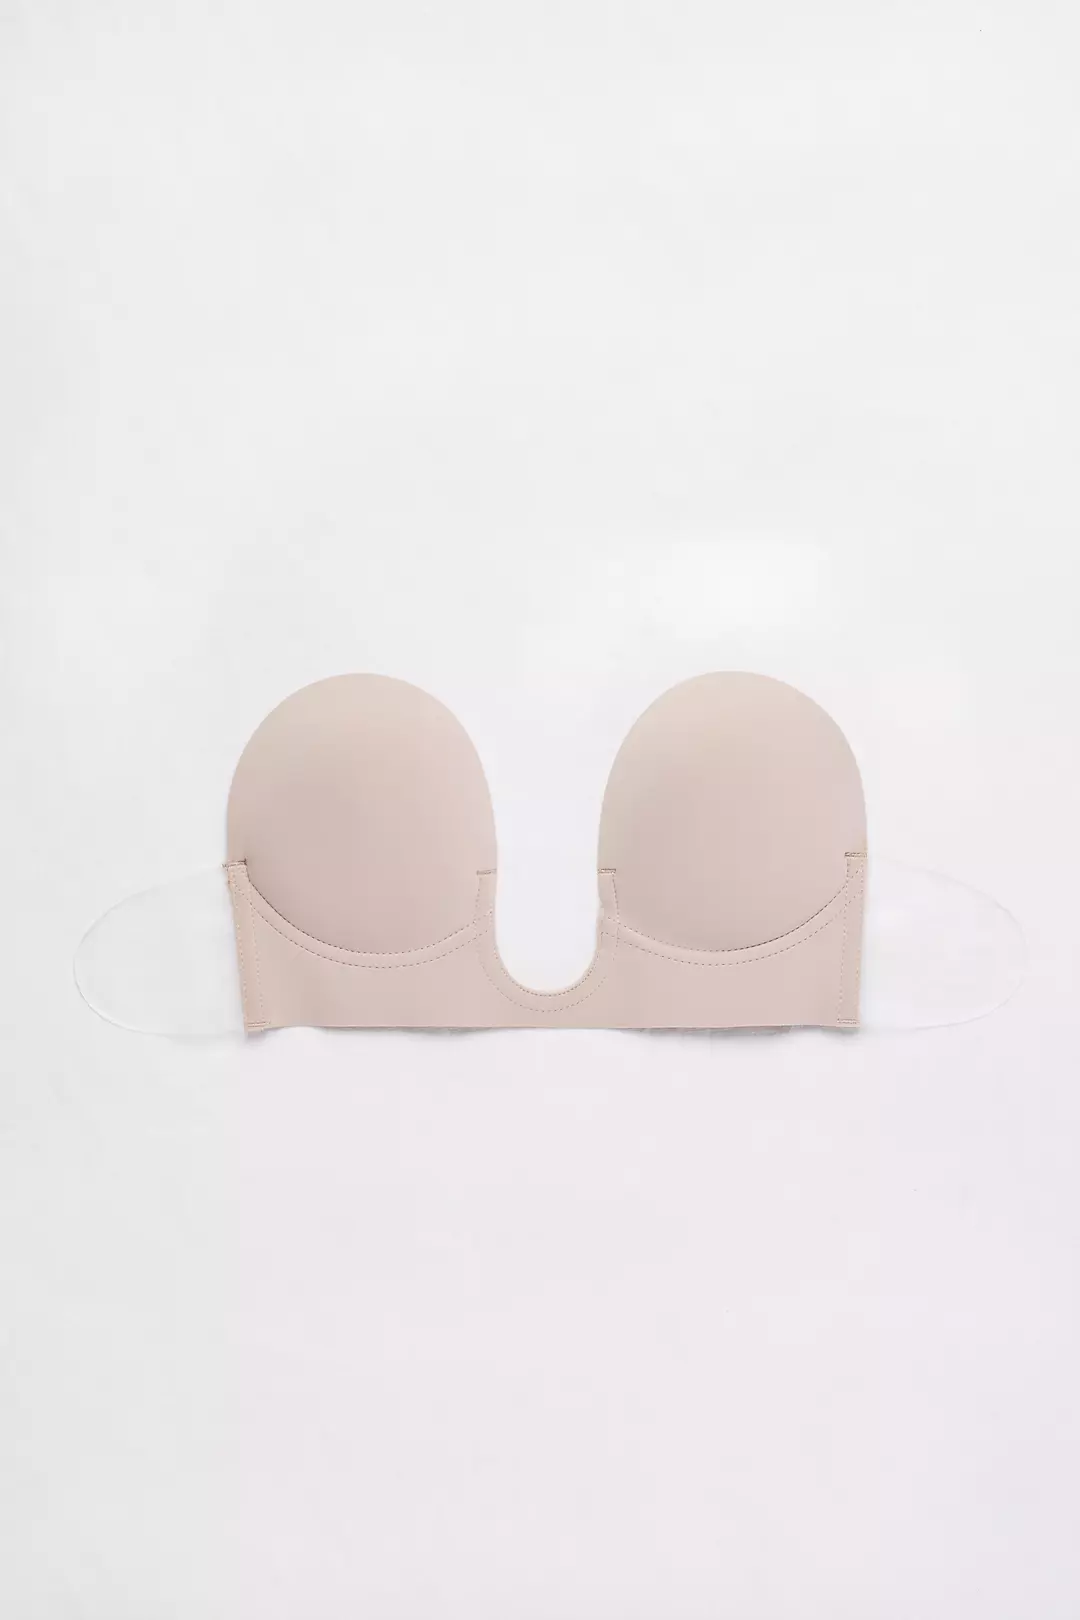 Fashion Forms Strapless Backless Plunge Bra